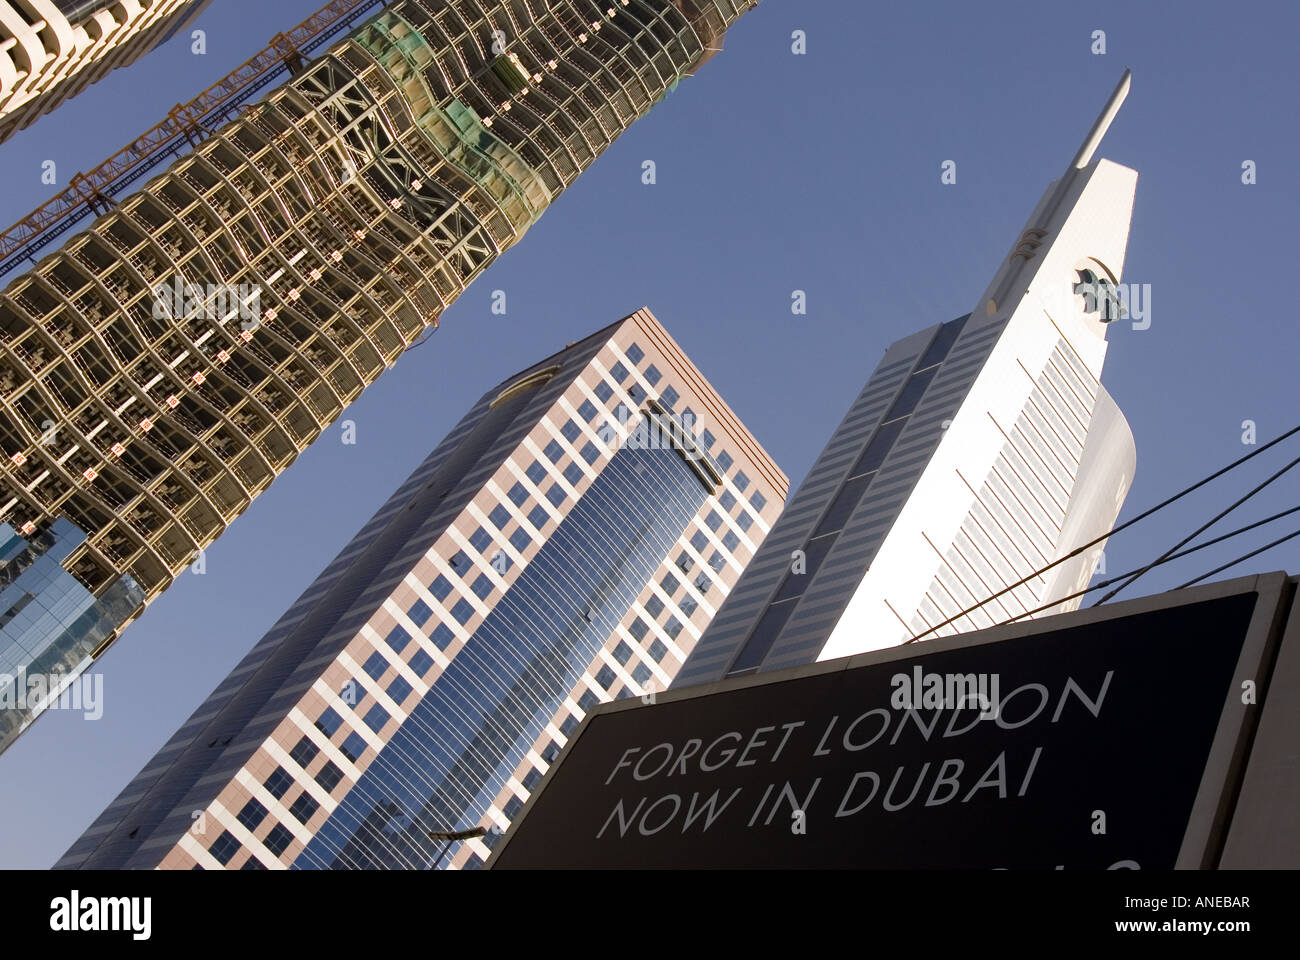 Advertising board on Sheikh Zayed Road with skyscrapers behind in Dubai, UAE. Stock Photo